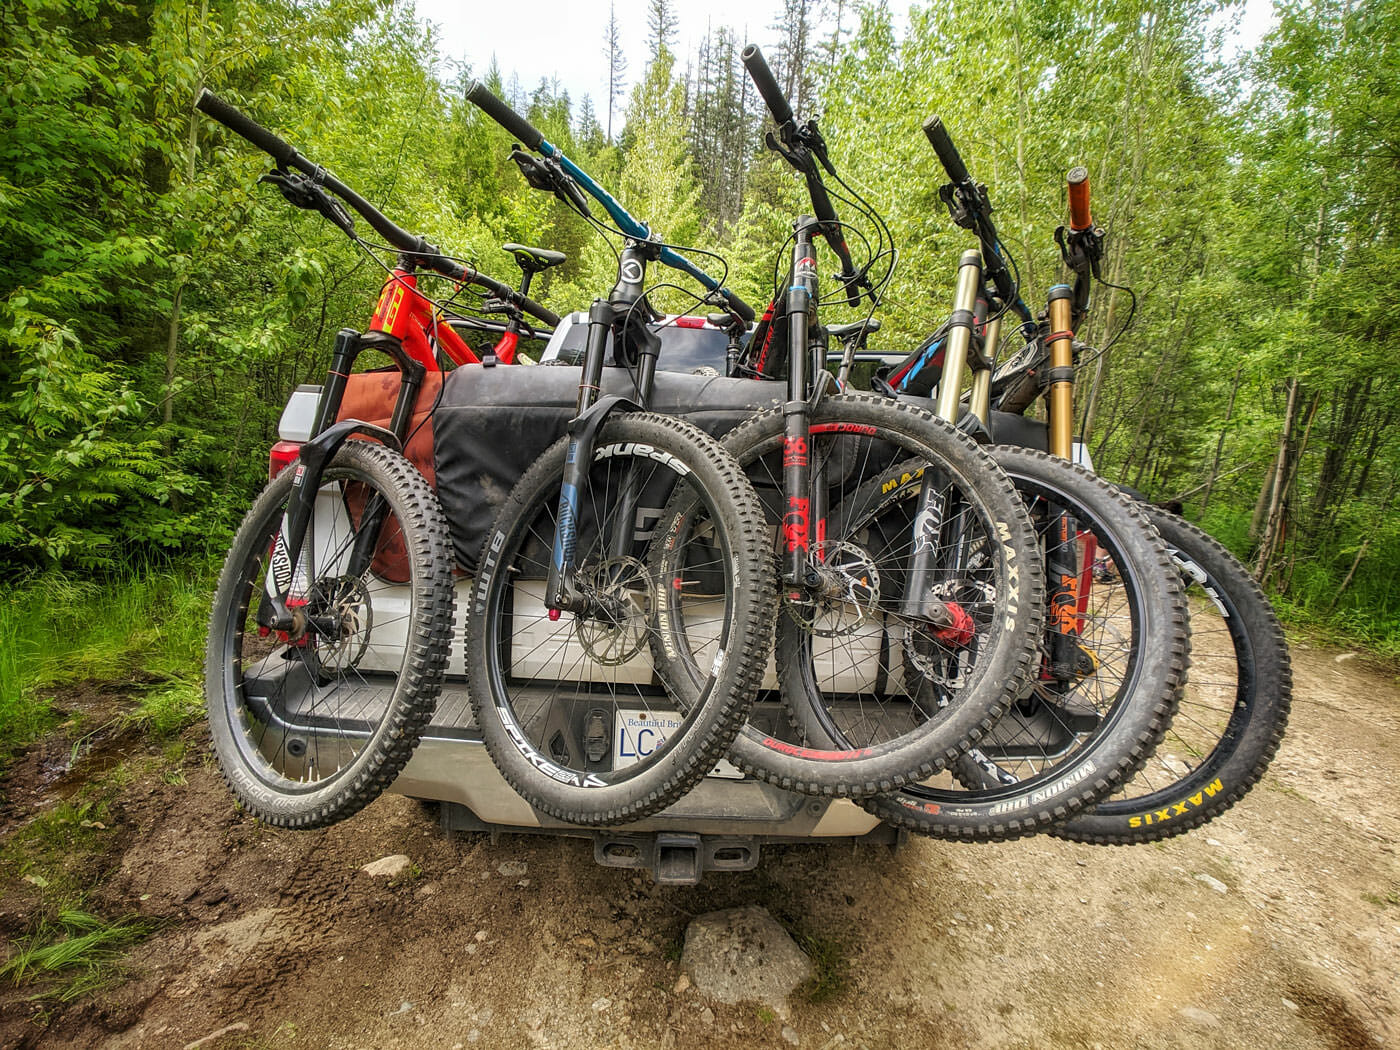 Mountain bikes loaded in the back of a truck on a forest service road.